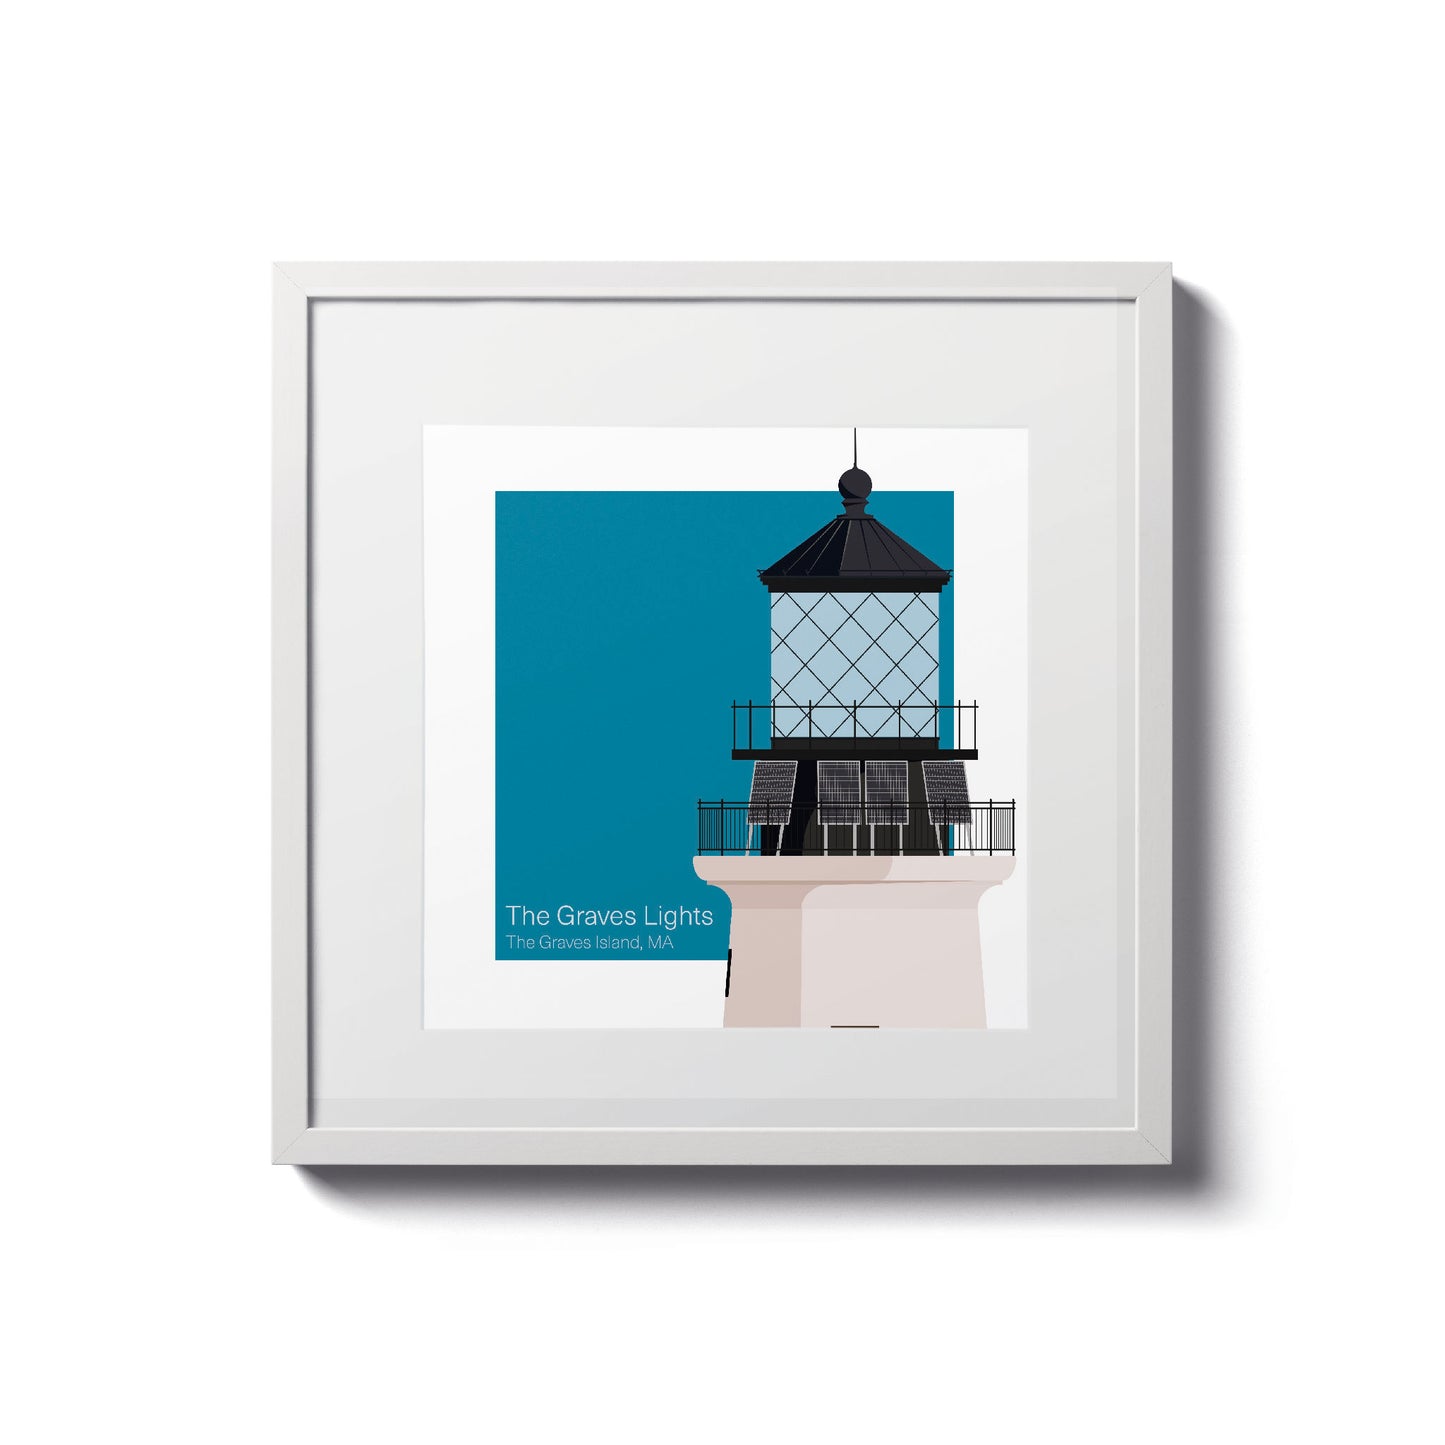 Illustration of the The Graves lighthouse, MA, USA. On a white background with aqua blue square as a backdrop., in a white frame  and measuring 8"x8" (20x20cm).